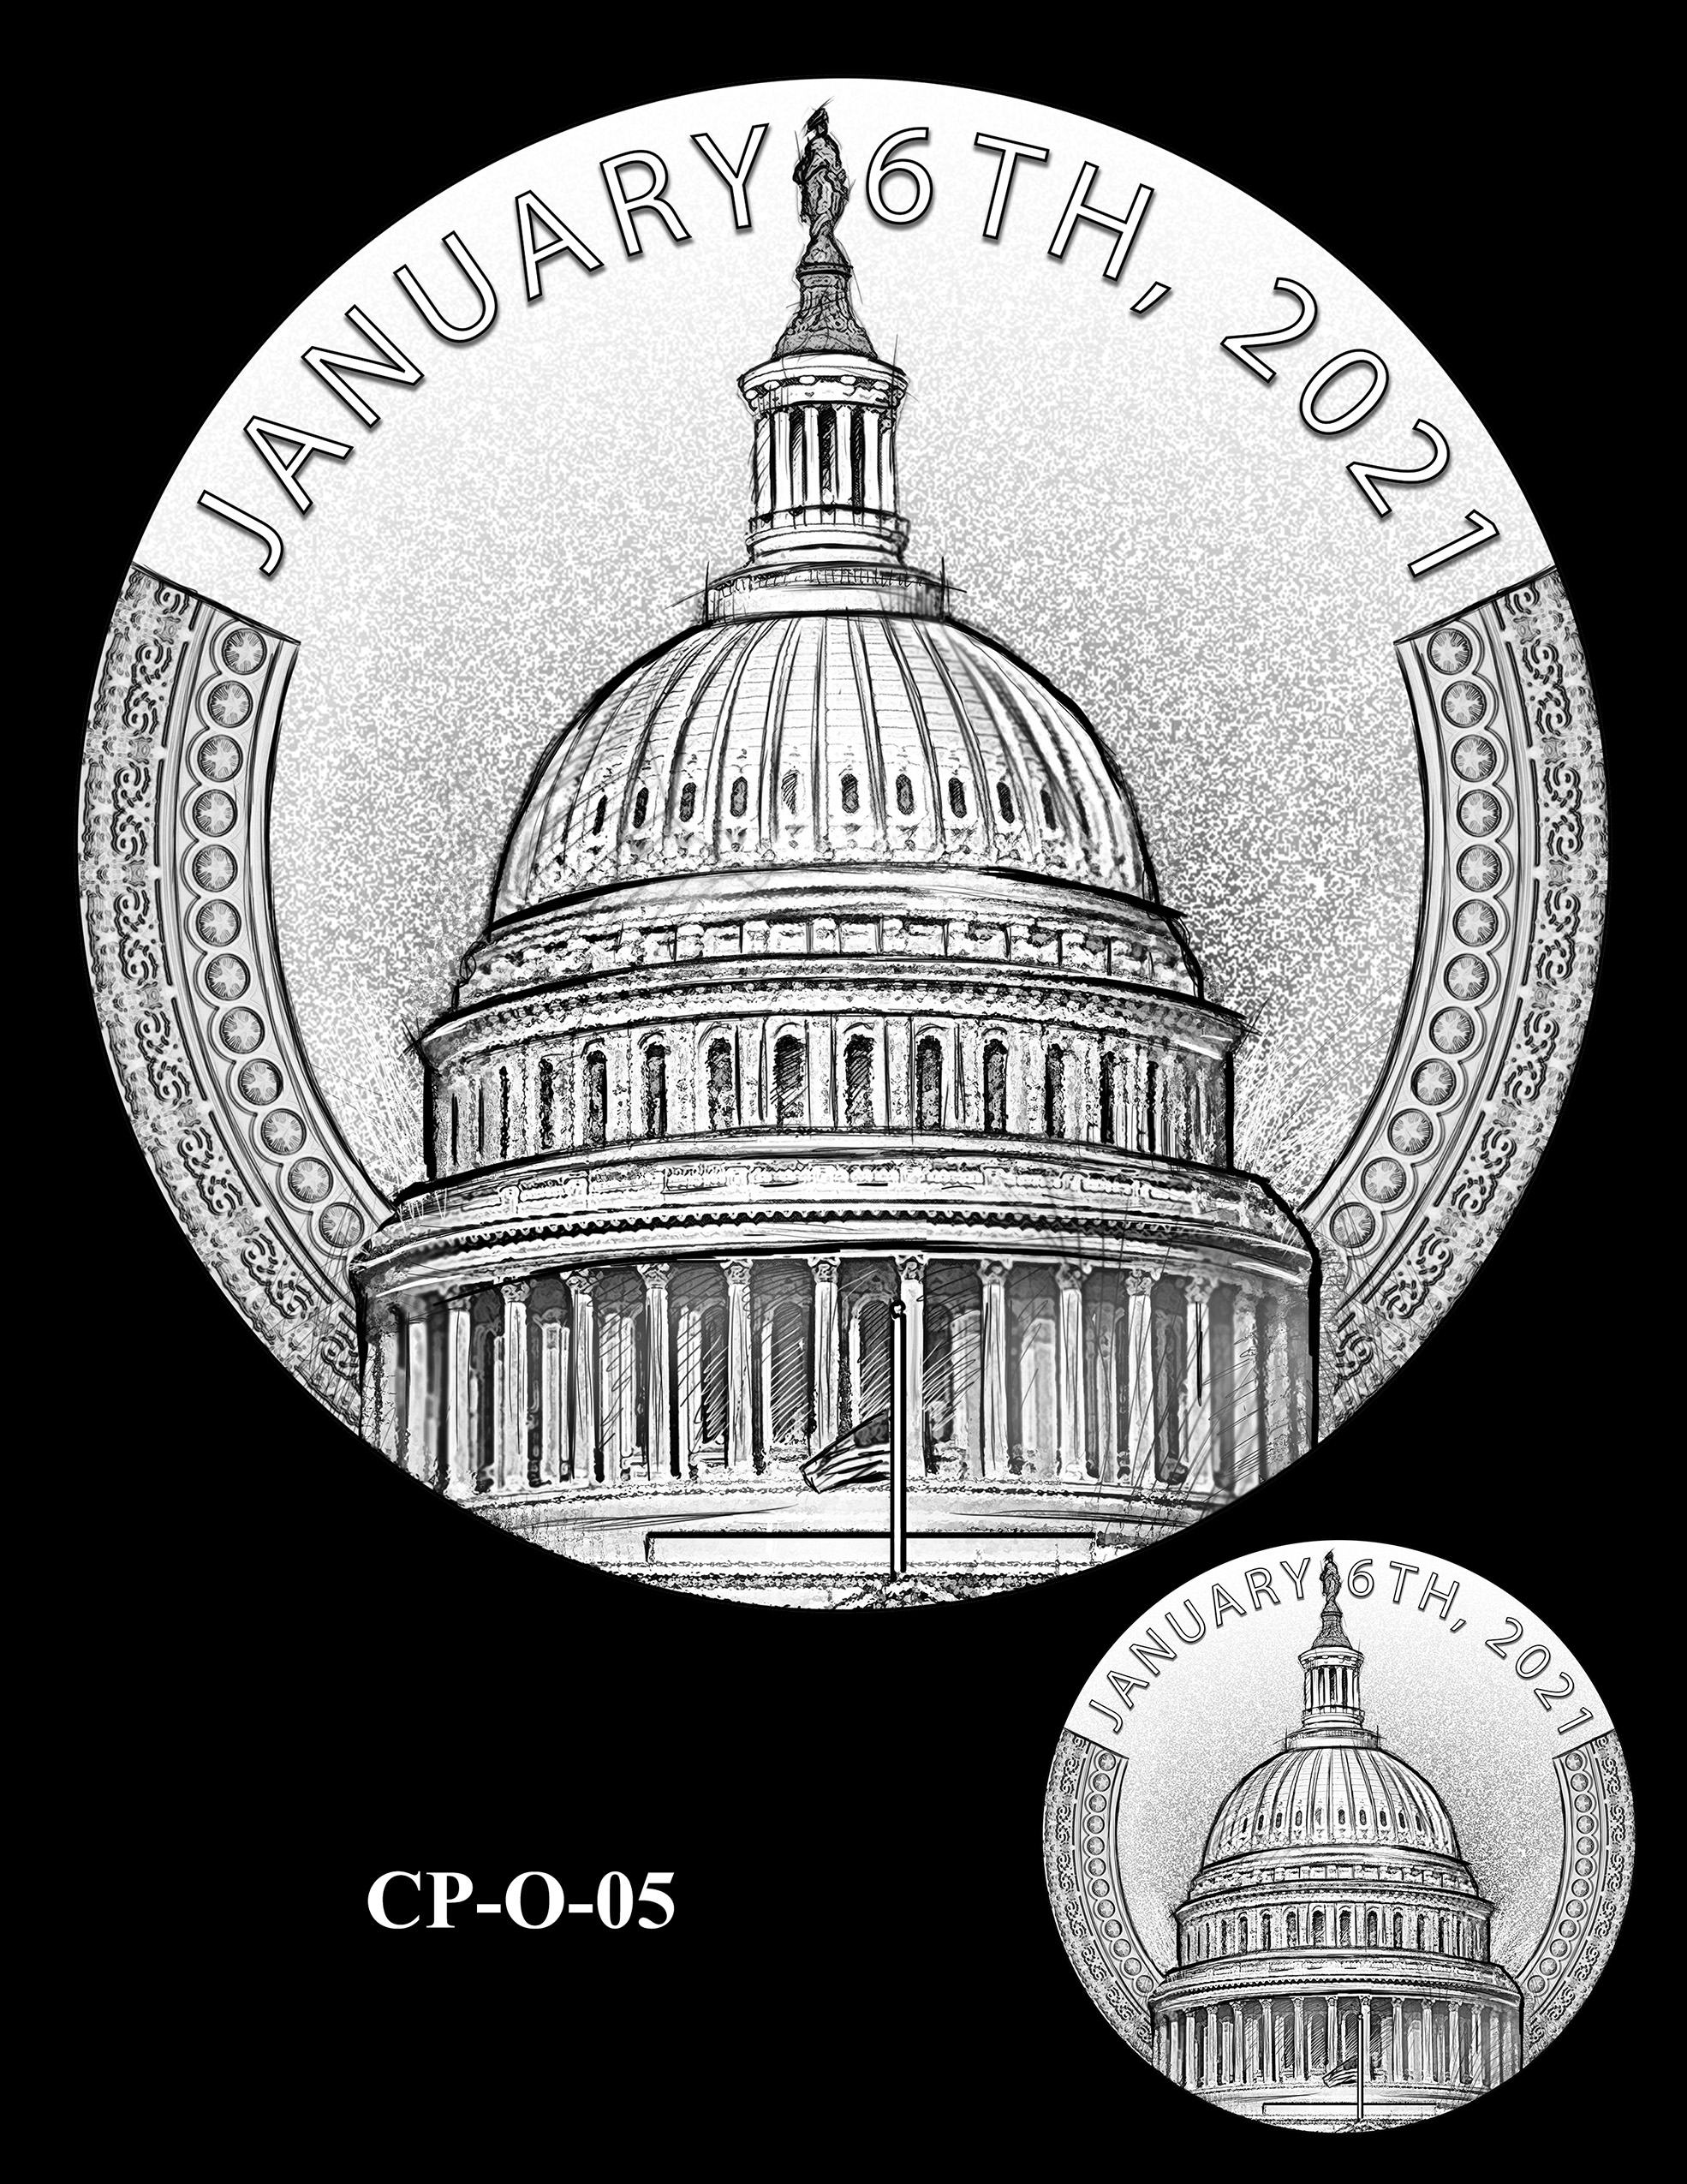 CP-O-05 -- Congressional Gold Medal for Those Who Protected the U.S. Capitol on January 6th 2021